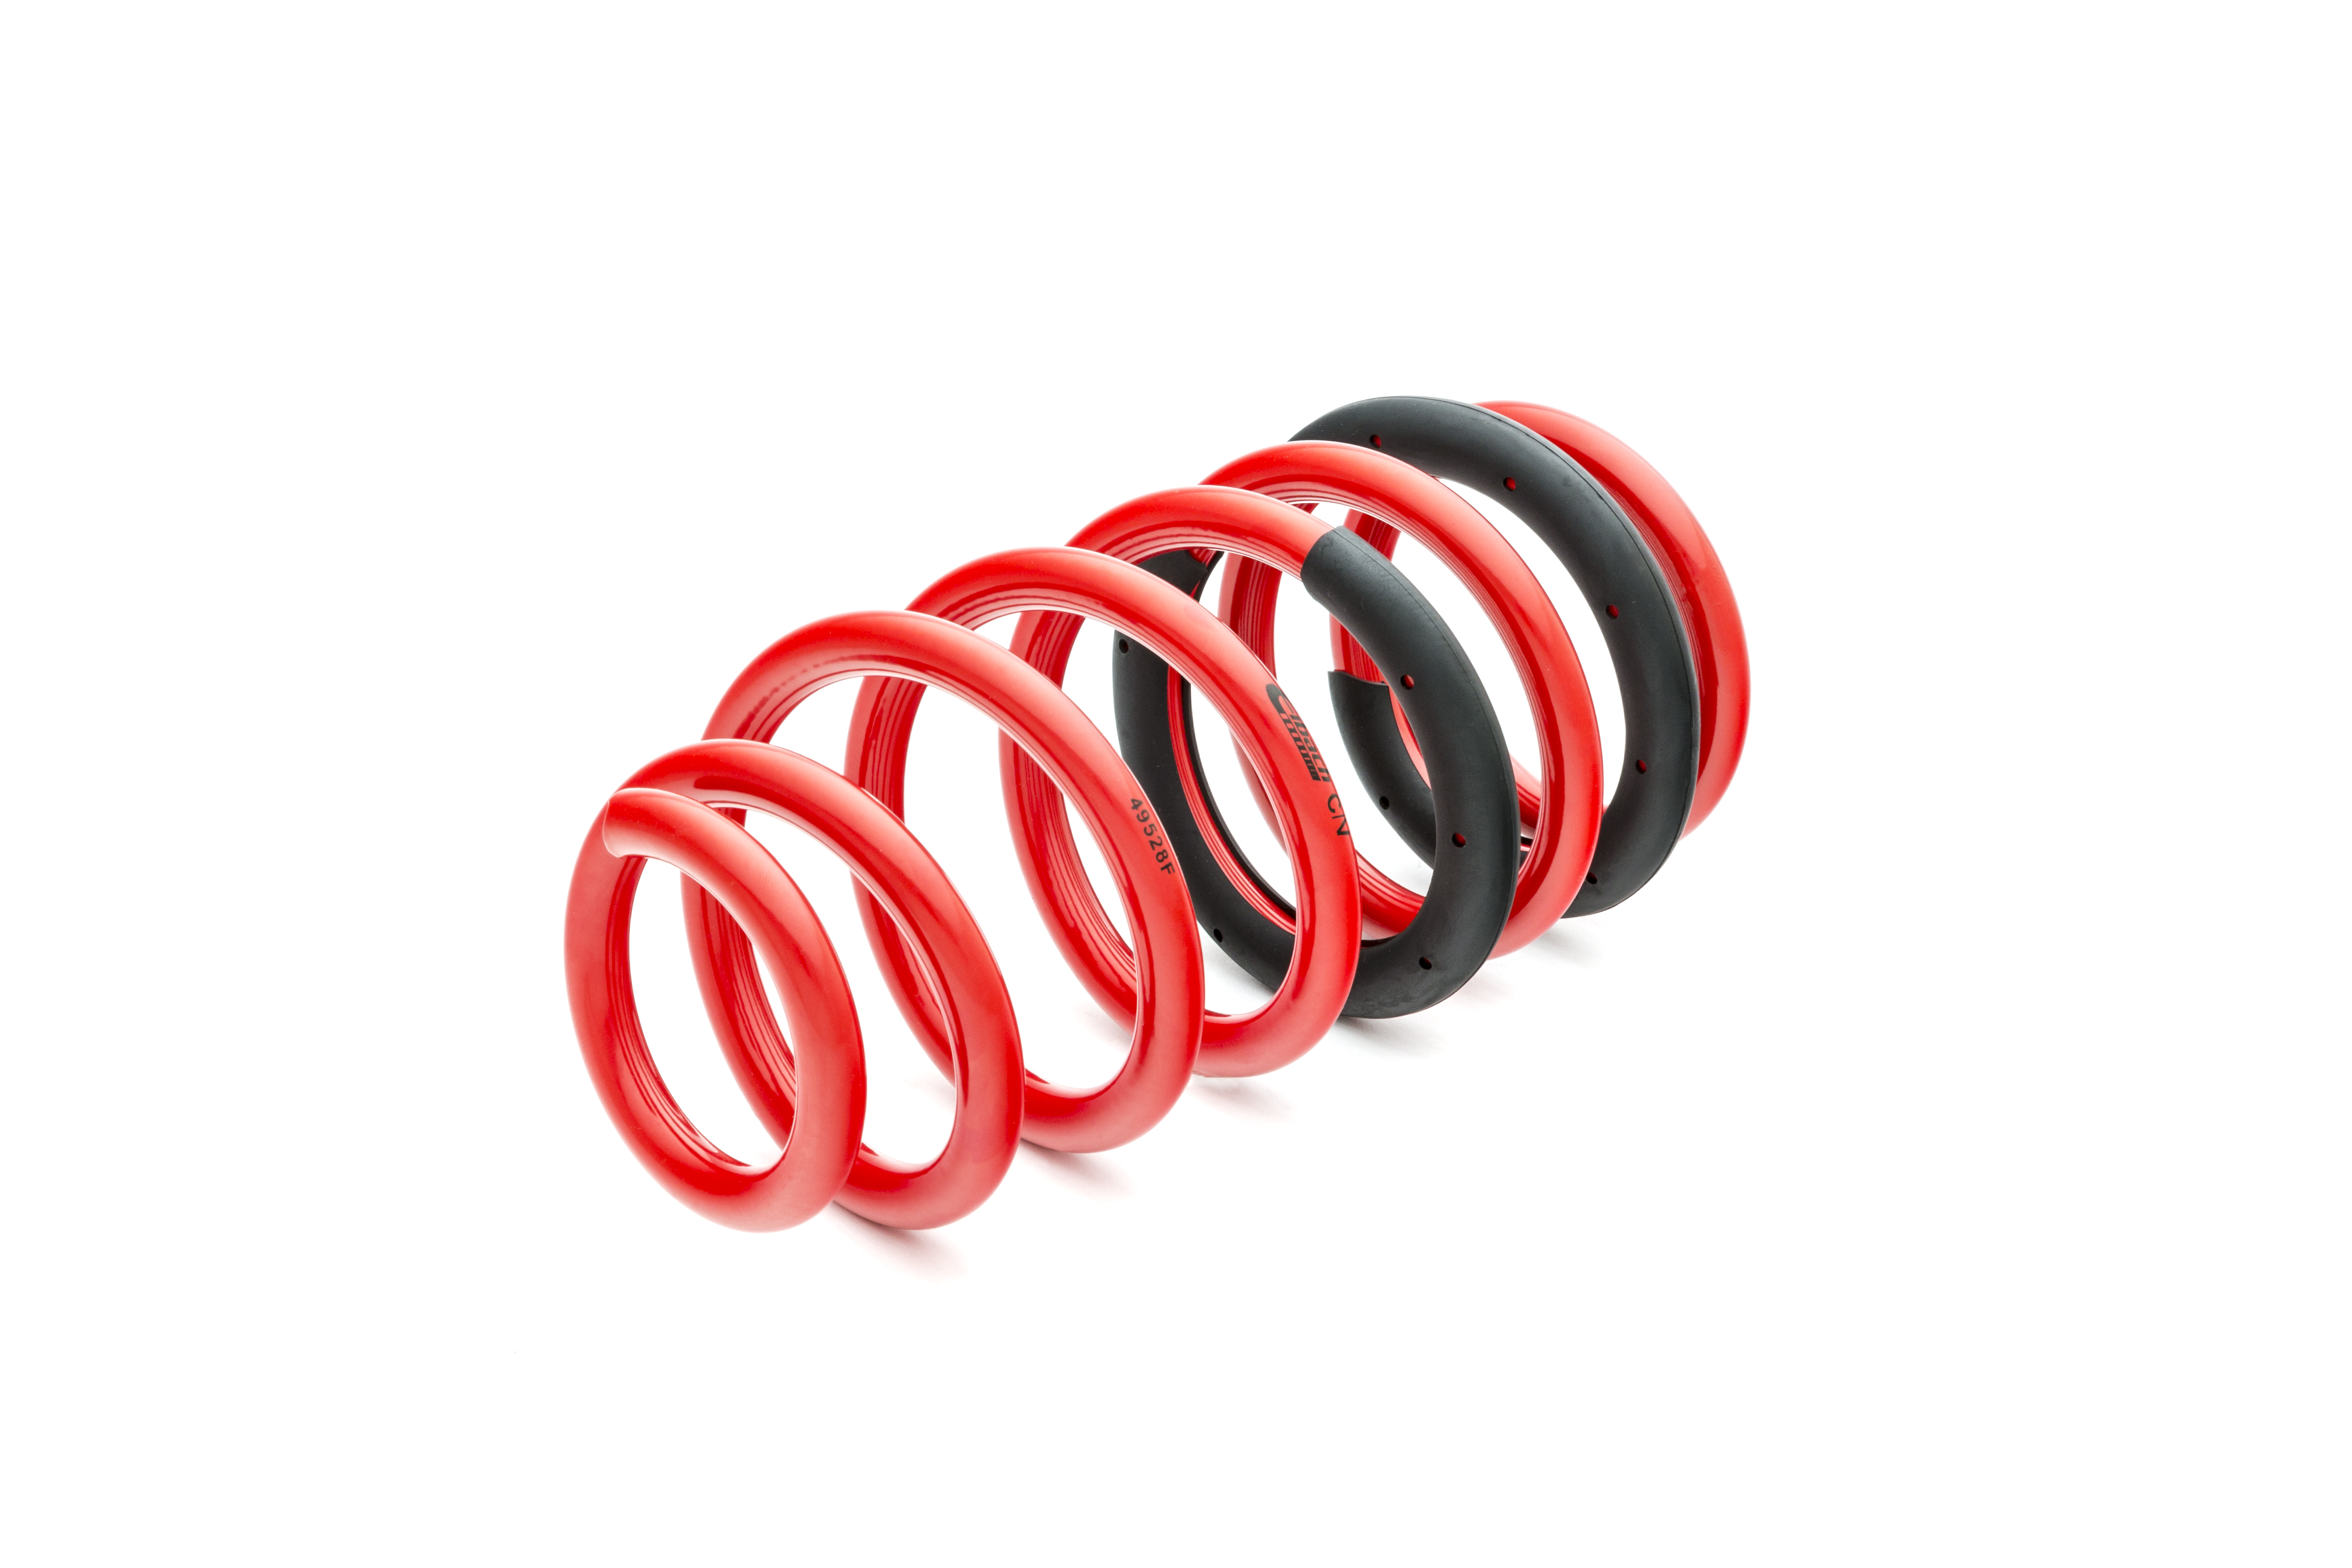 Eibach Springs Eibach E10-27-004-01-22 Pro-Kit Performance Spring (Set of 4 Spring) Black, Front: 0.8 in // Rear: 1.3 in